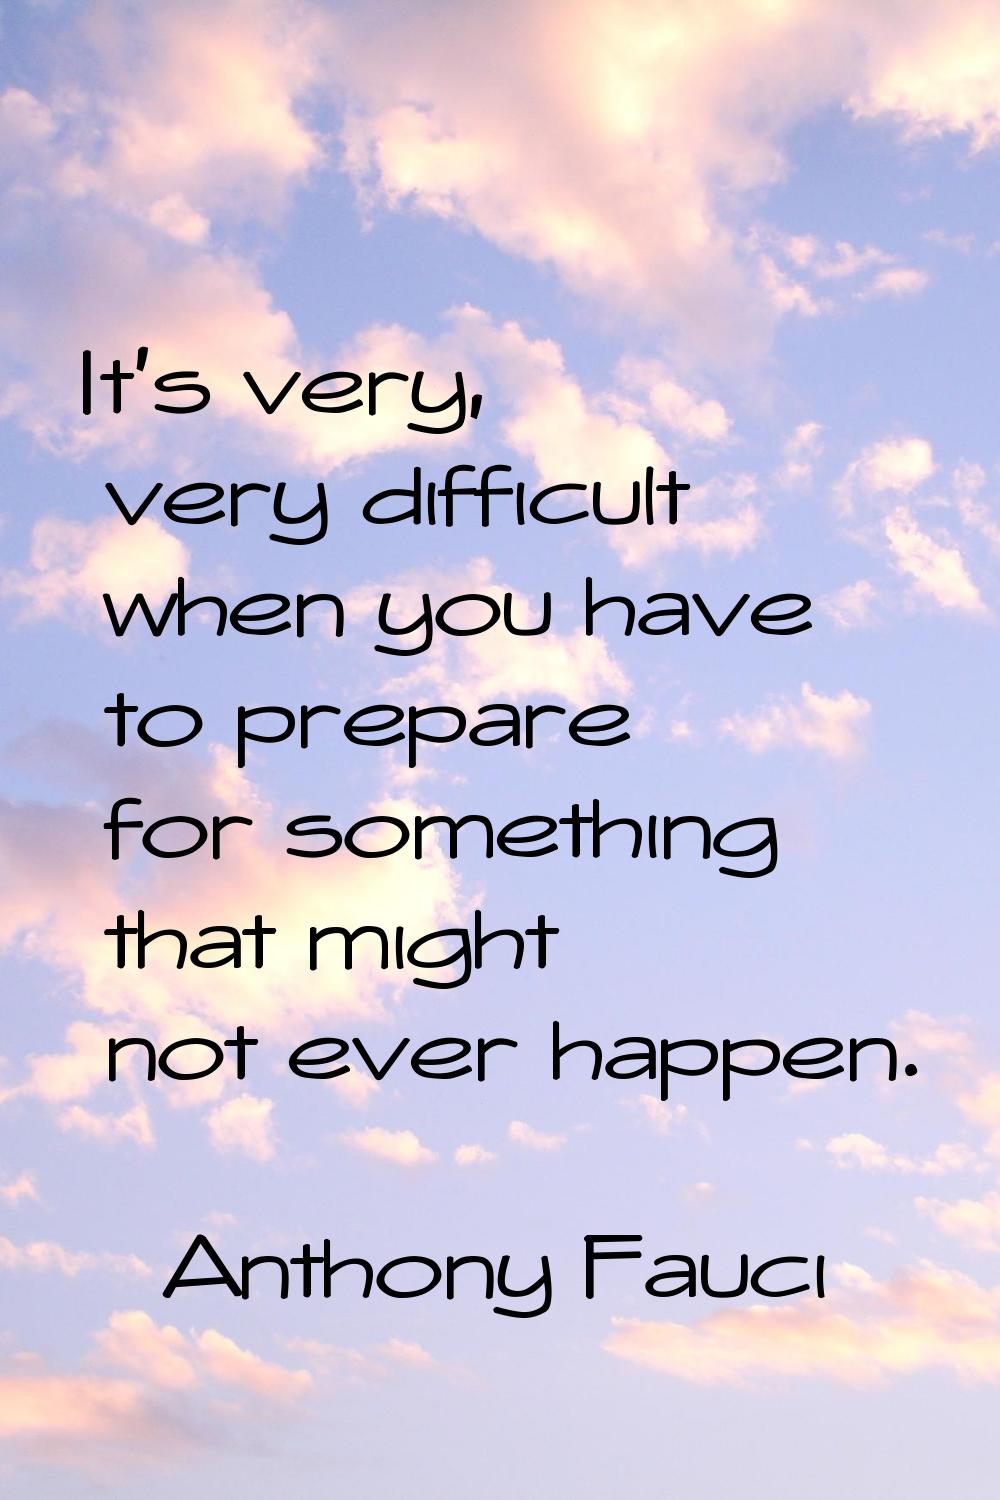 It's very, very difficult when you have to prepare for something that might not ever happen.